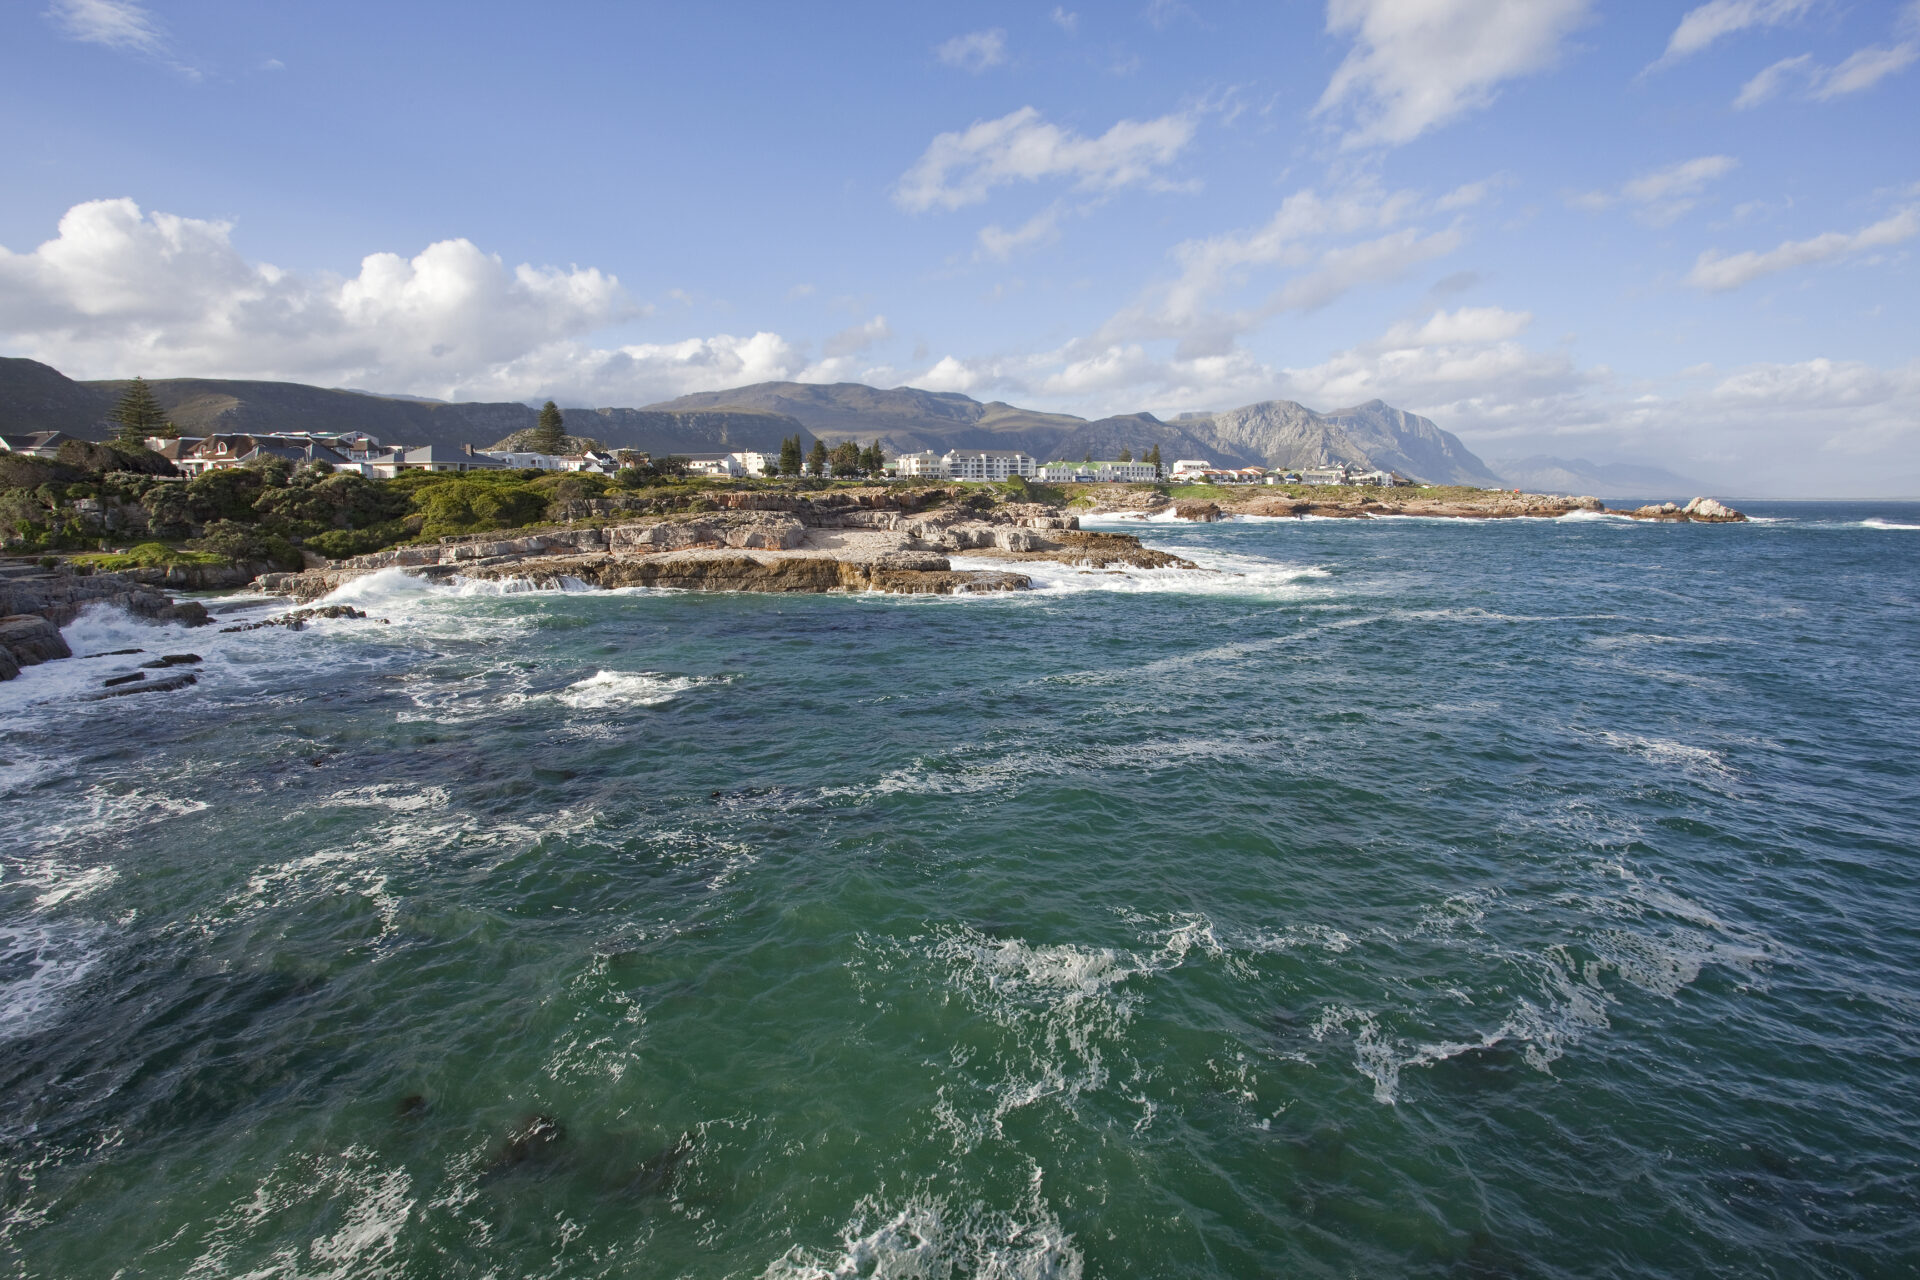 The Hermanus coastline - the top place for whale watching in South Africa.